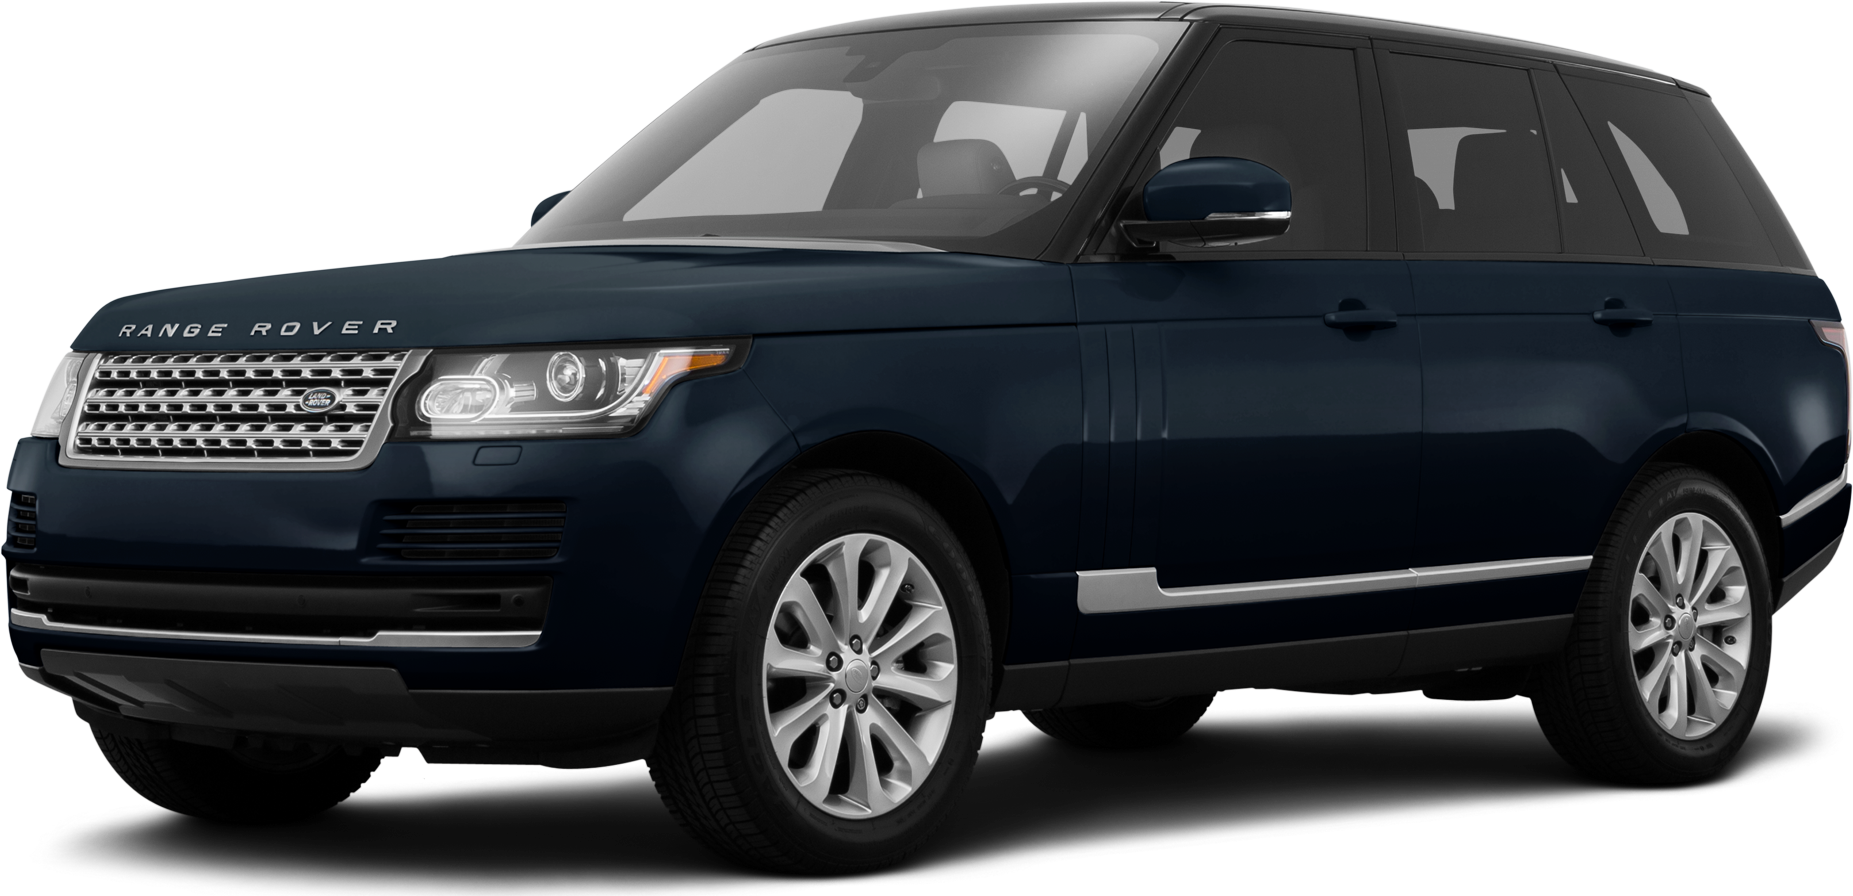 2015 Land Rover Range Rover Values & Cars for Sale | Kelley Blue Book